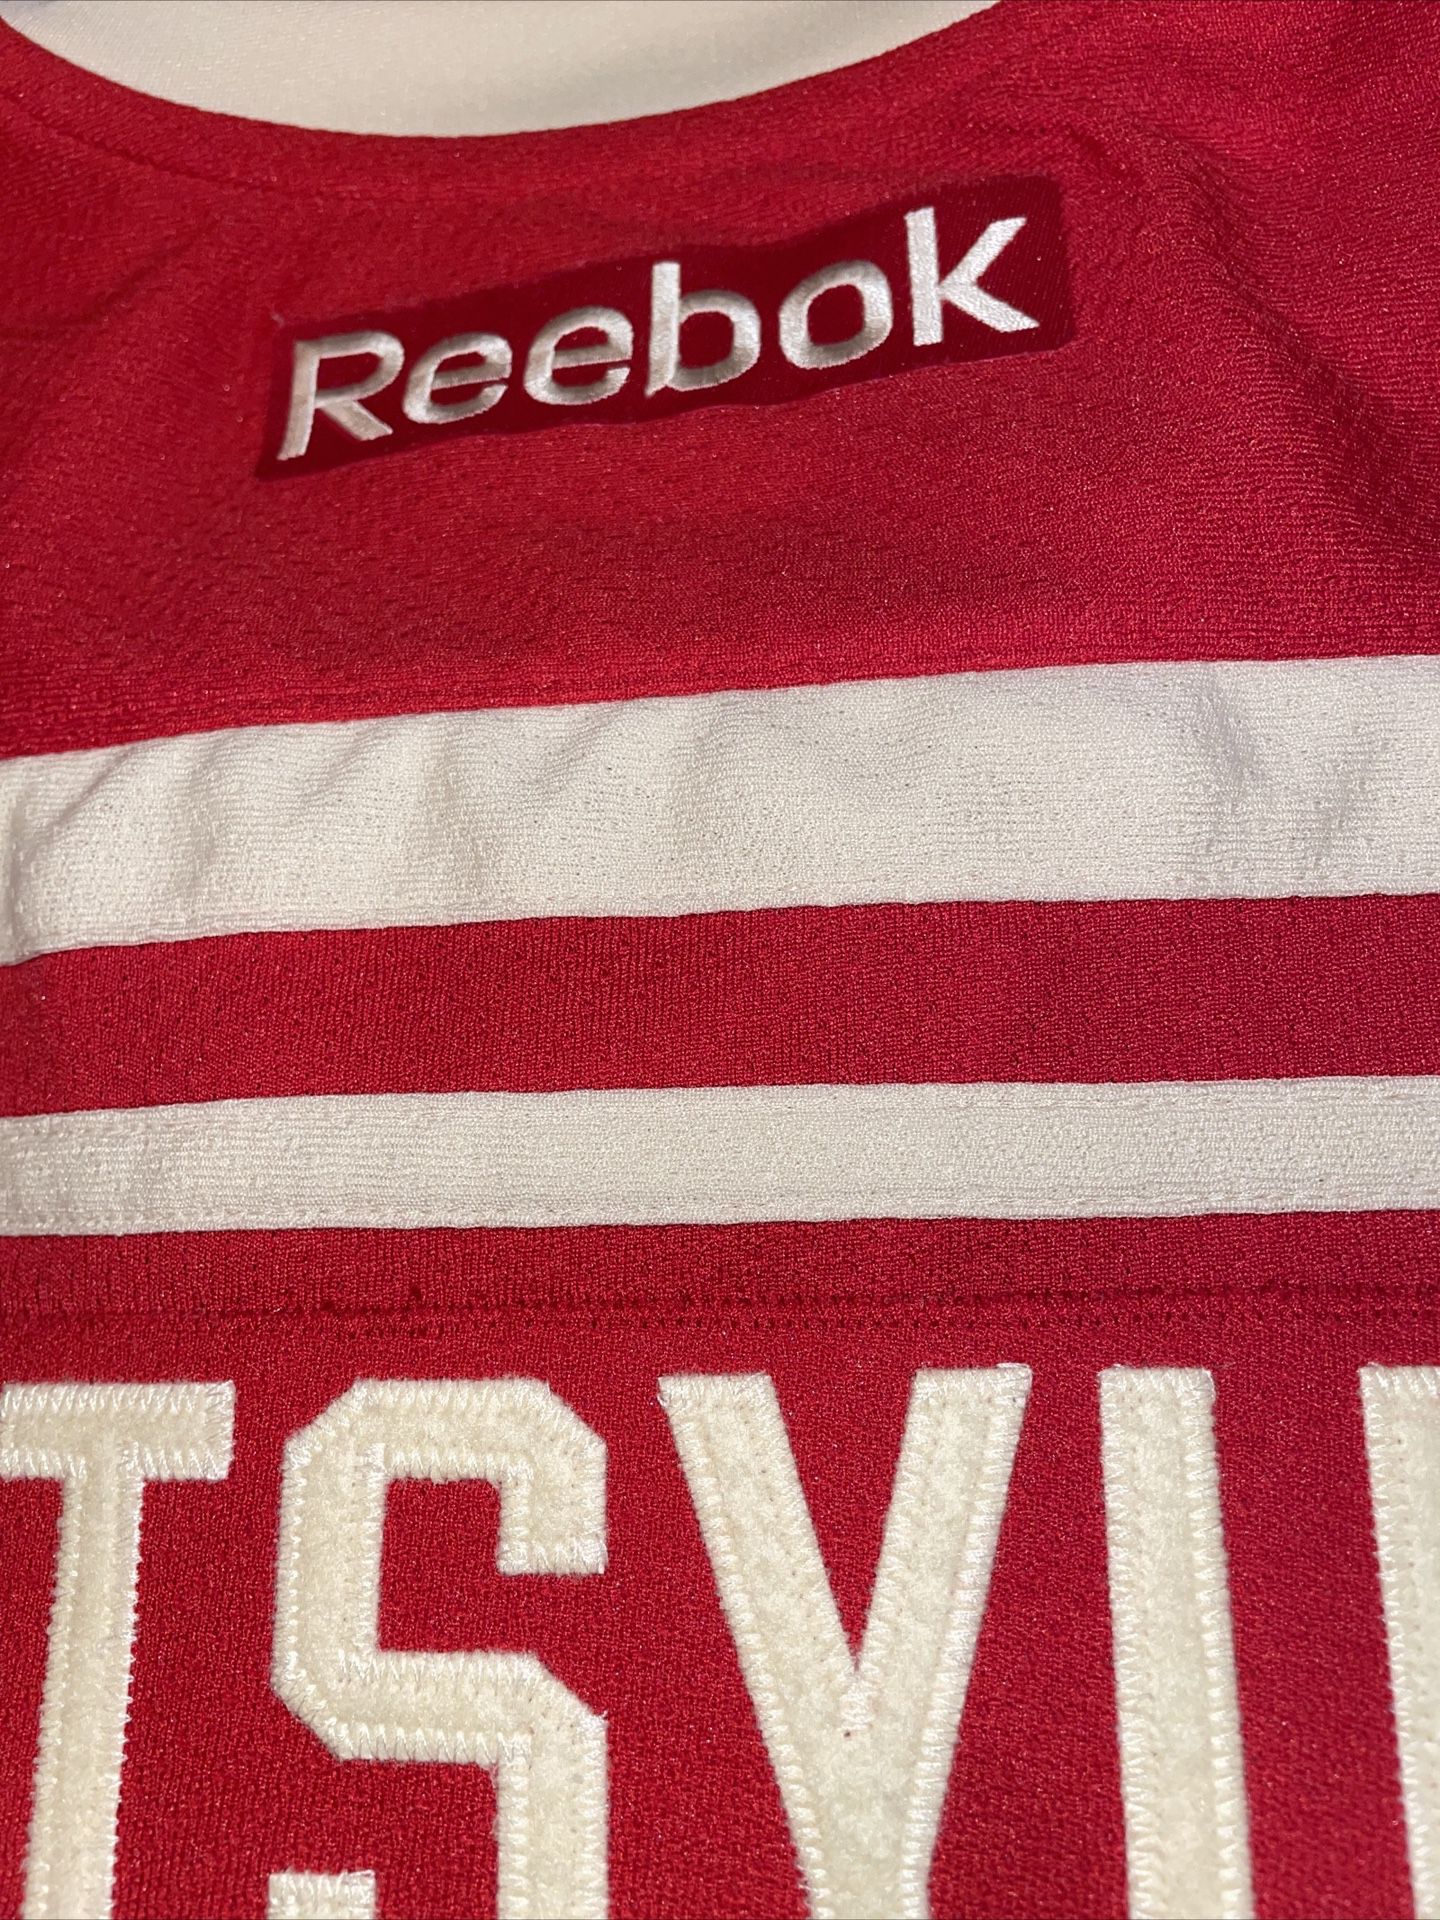 Adult Xxl Reebok Pavel Datsyuk Detroit Red Wings 2014 Winter Classic Jersey  Sewn for Sale in Rochester, MI - OfferUp